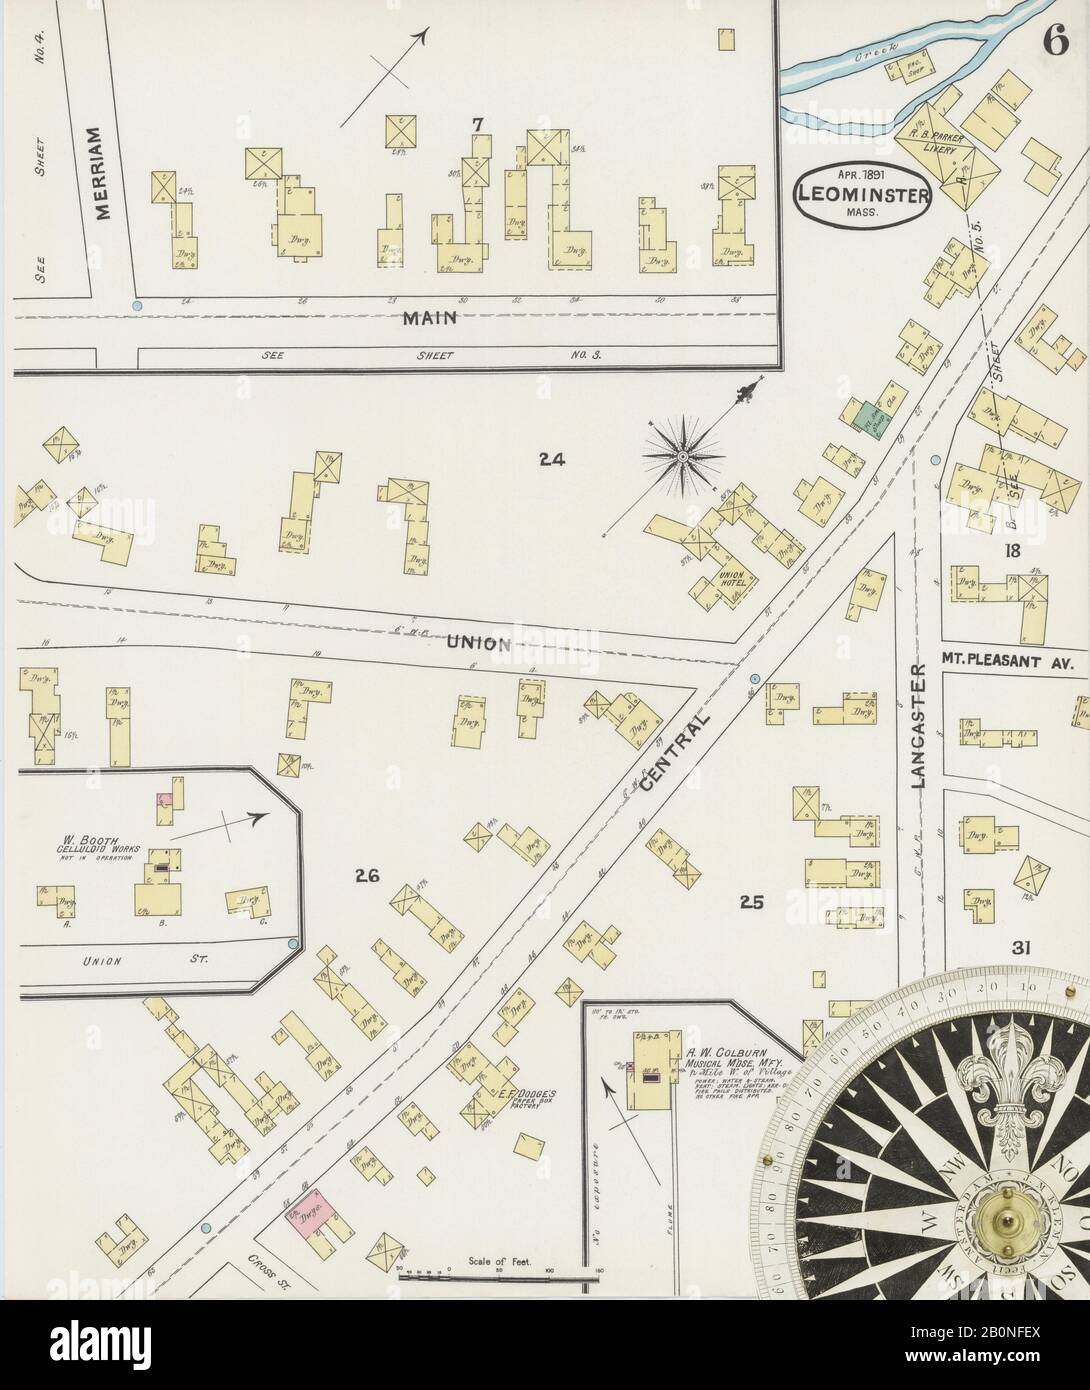 Image 6 of Sanborn Fire Insurance Map from Leominster, Worcester County, Massachusetts. Apr 1891. 10 Sheet(s), America, street map with a Nineteenth Century compass Stock Photo